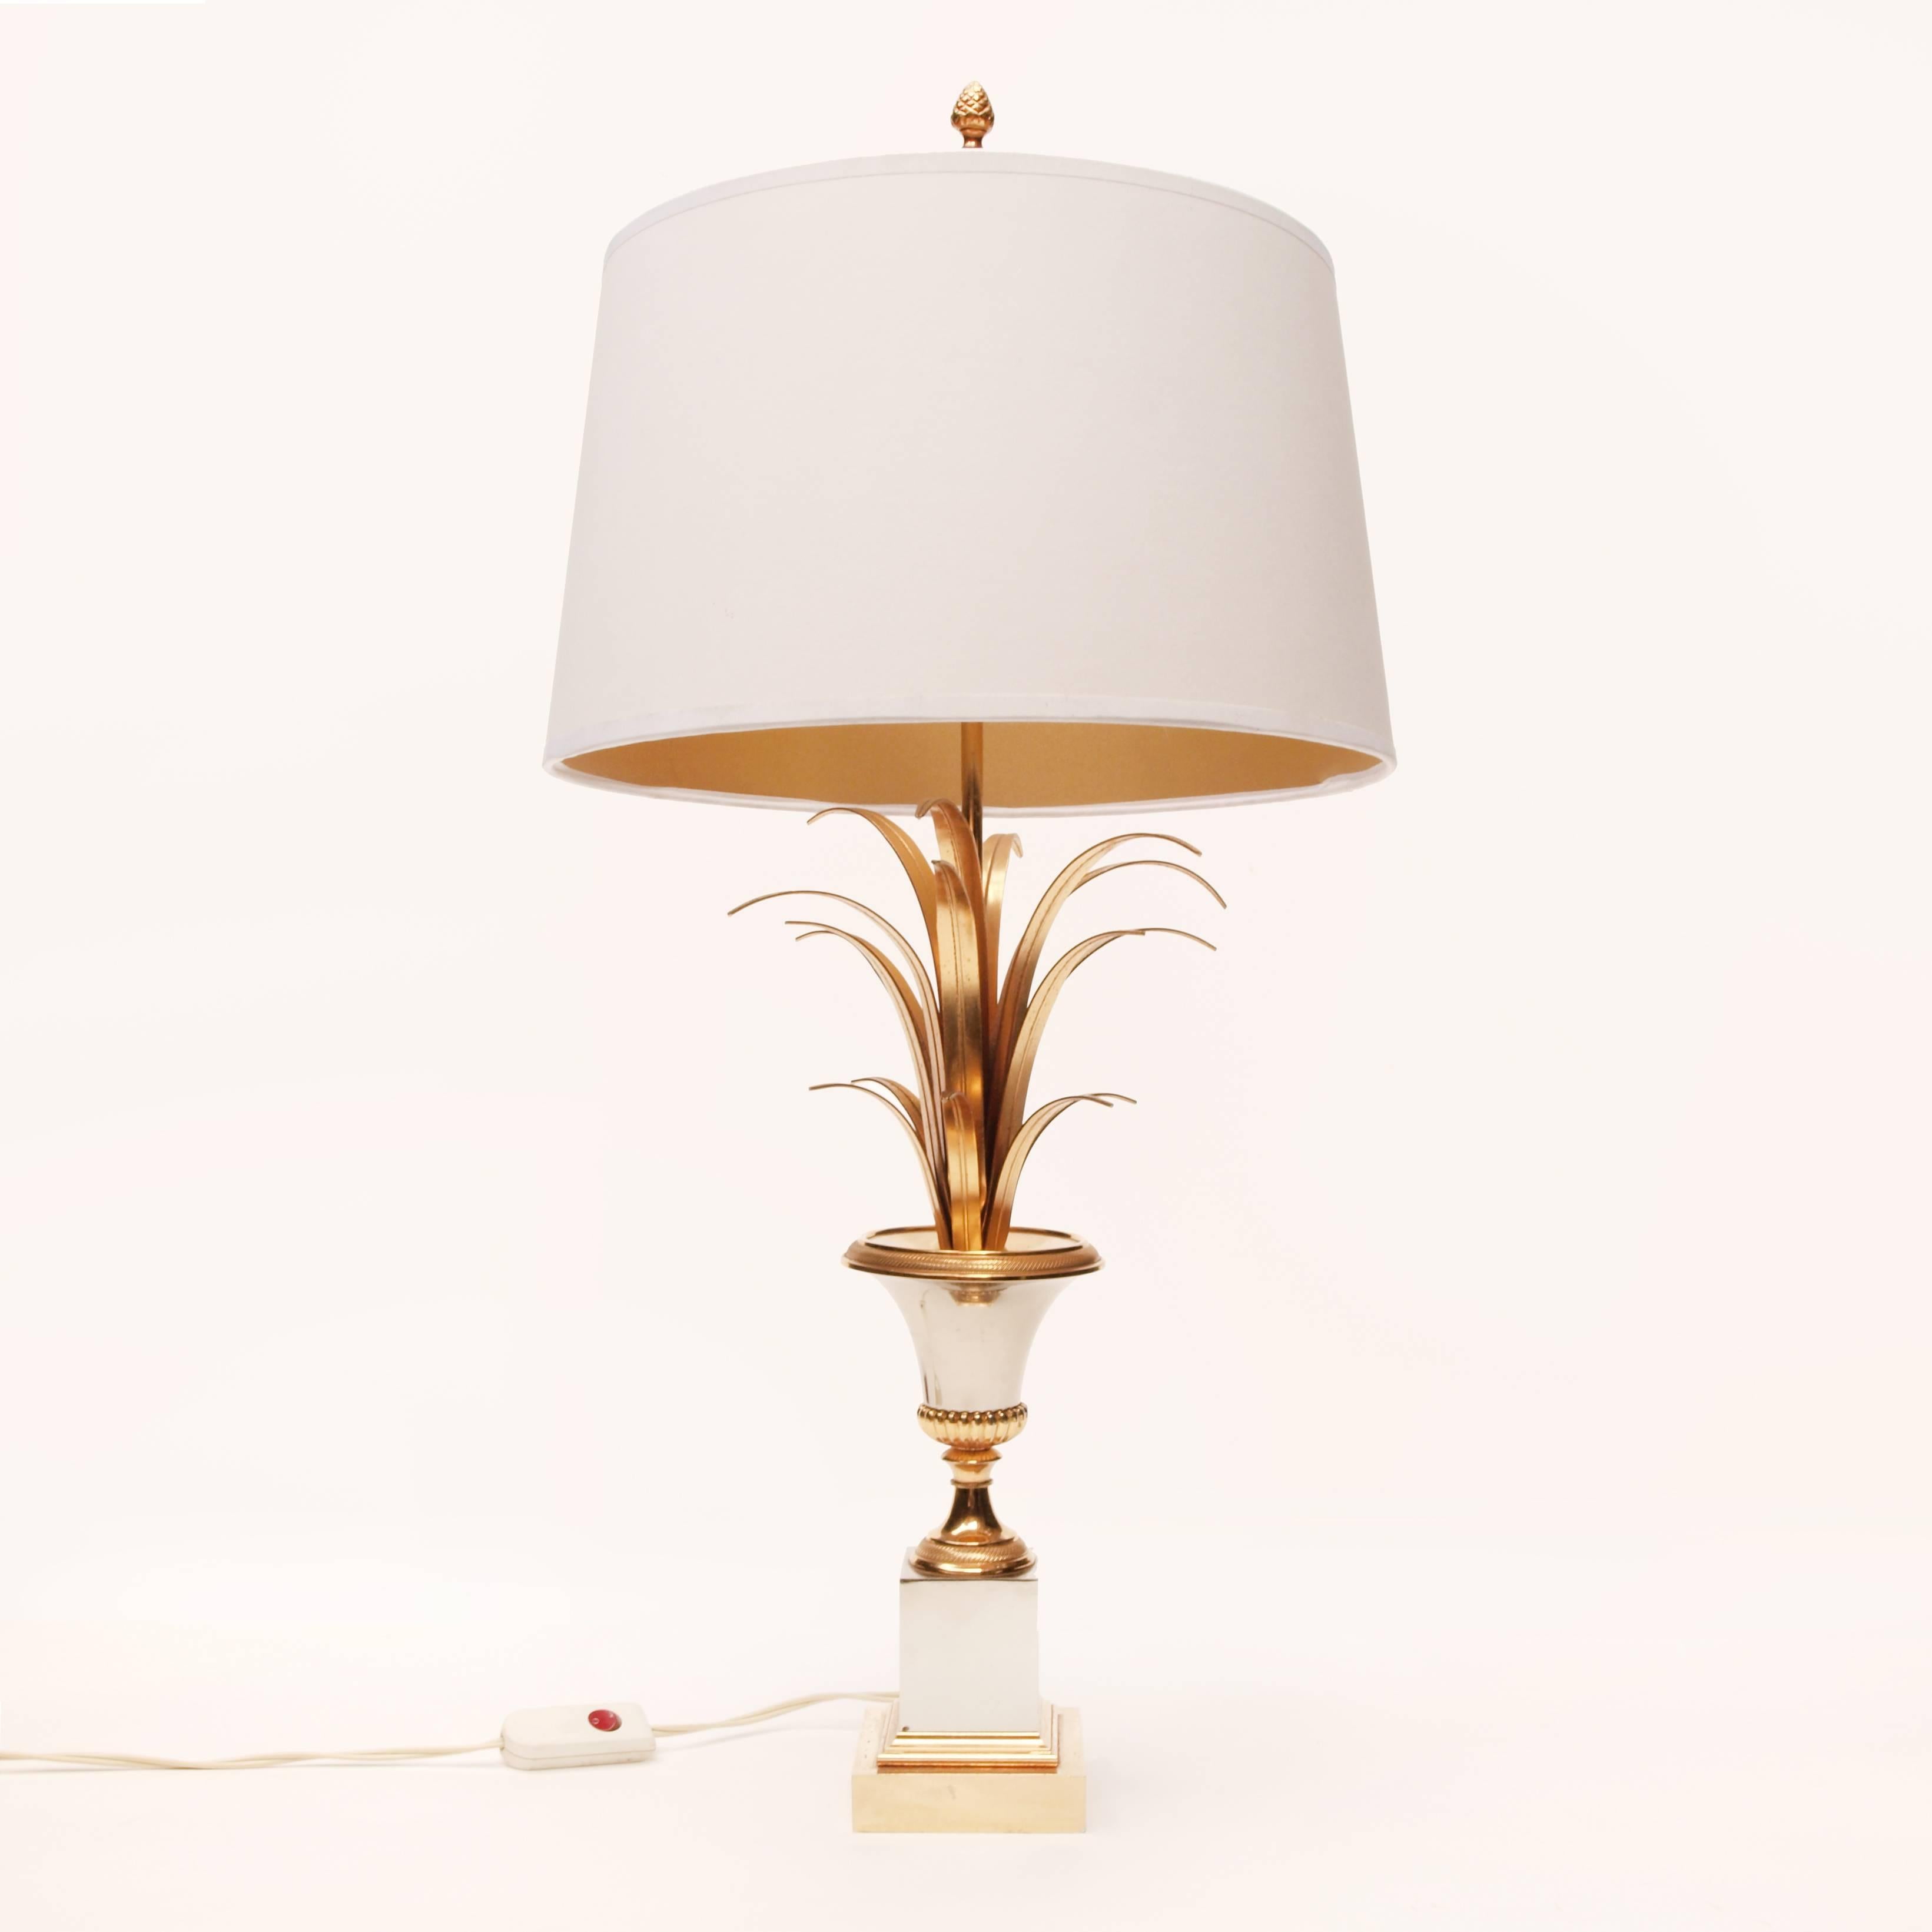 A beautiful Maison Charles style pineapple lamp. Typically neoclassical in style this lamp is finished in silver and brass, appointed with an acorn finial and gold lined shade, which all sits neatly on a polished sharp square base.